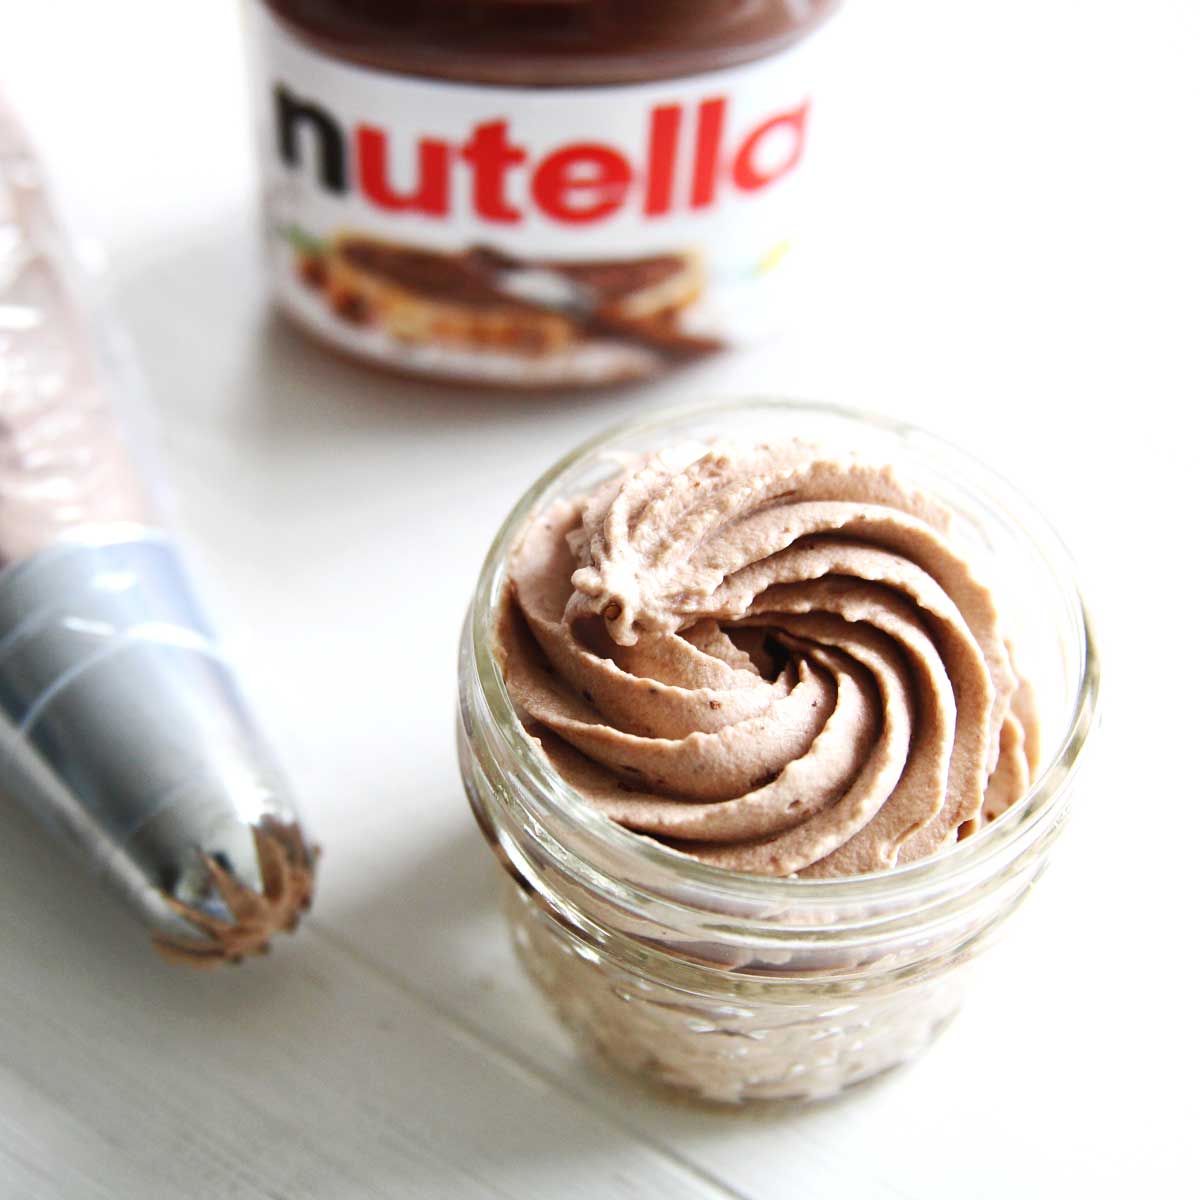 How to Make Nutella Chocolate Whipped Cream (Chantilly Cream) - Vegan Chocolate Whipped Cream